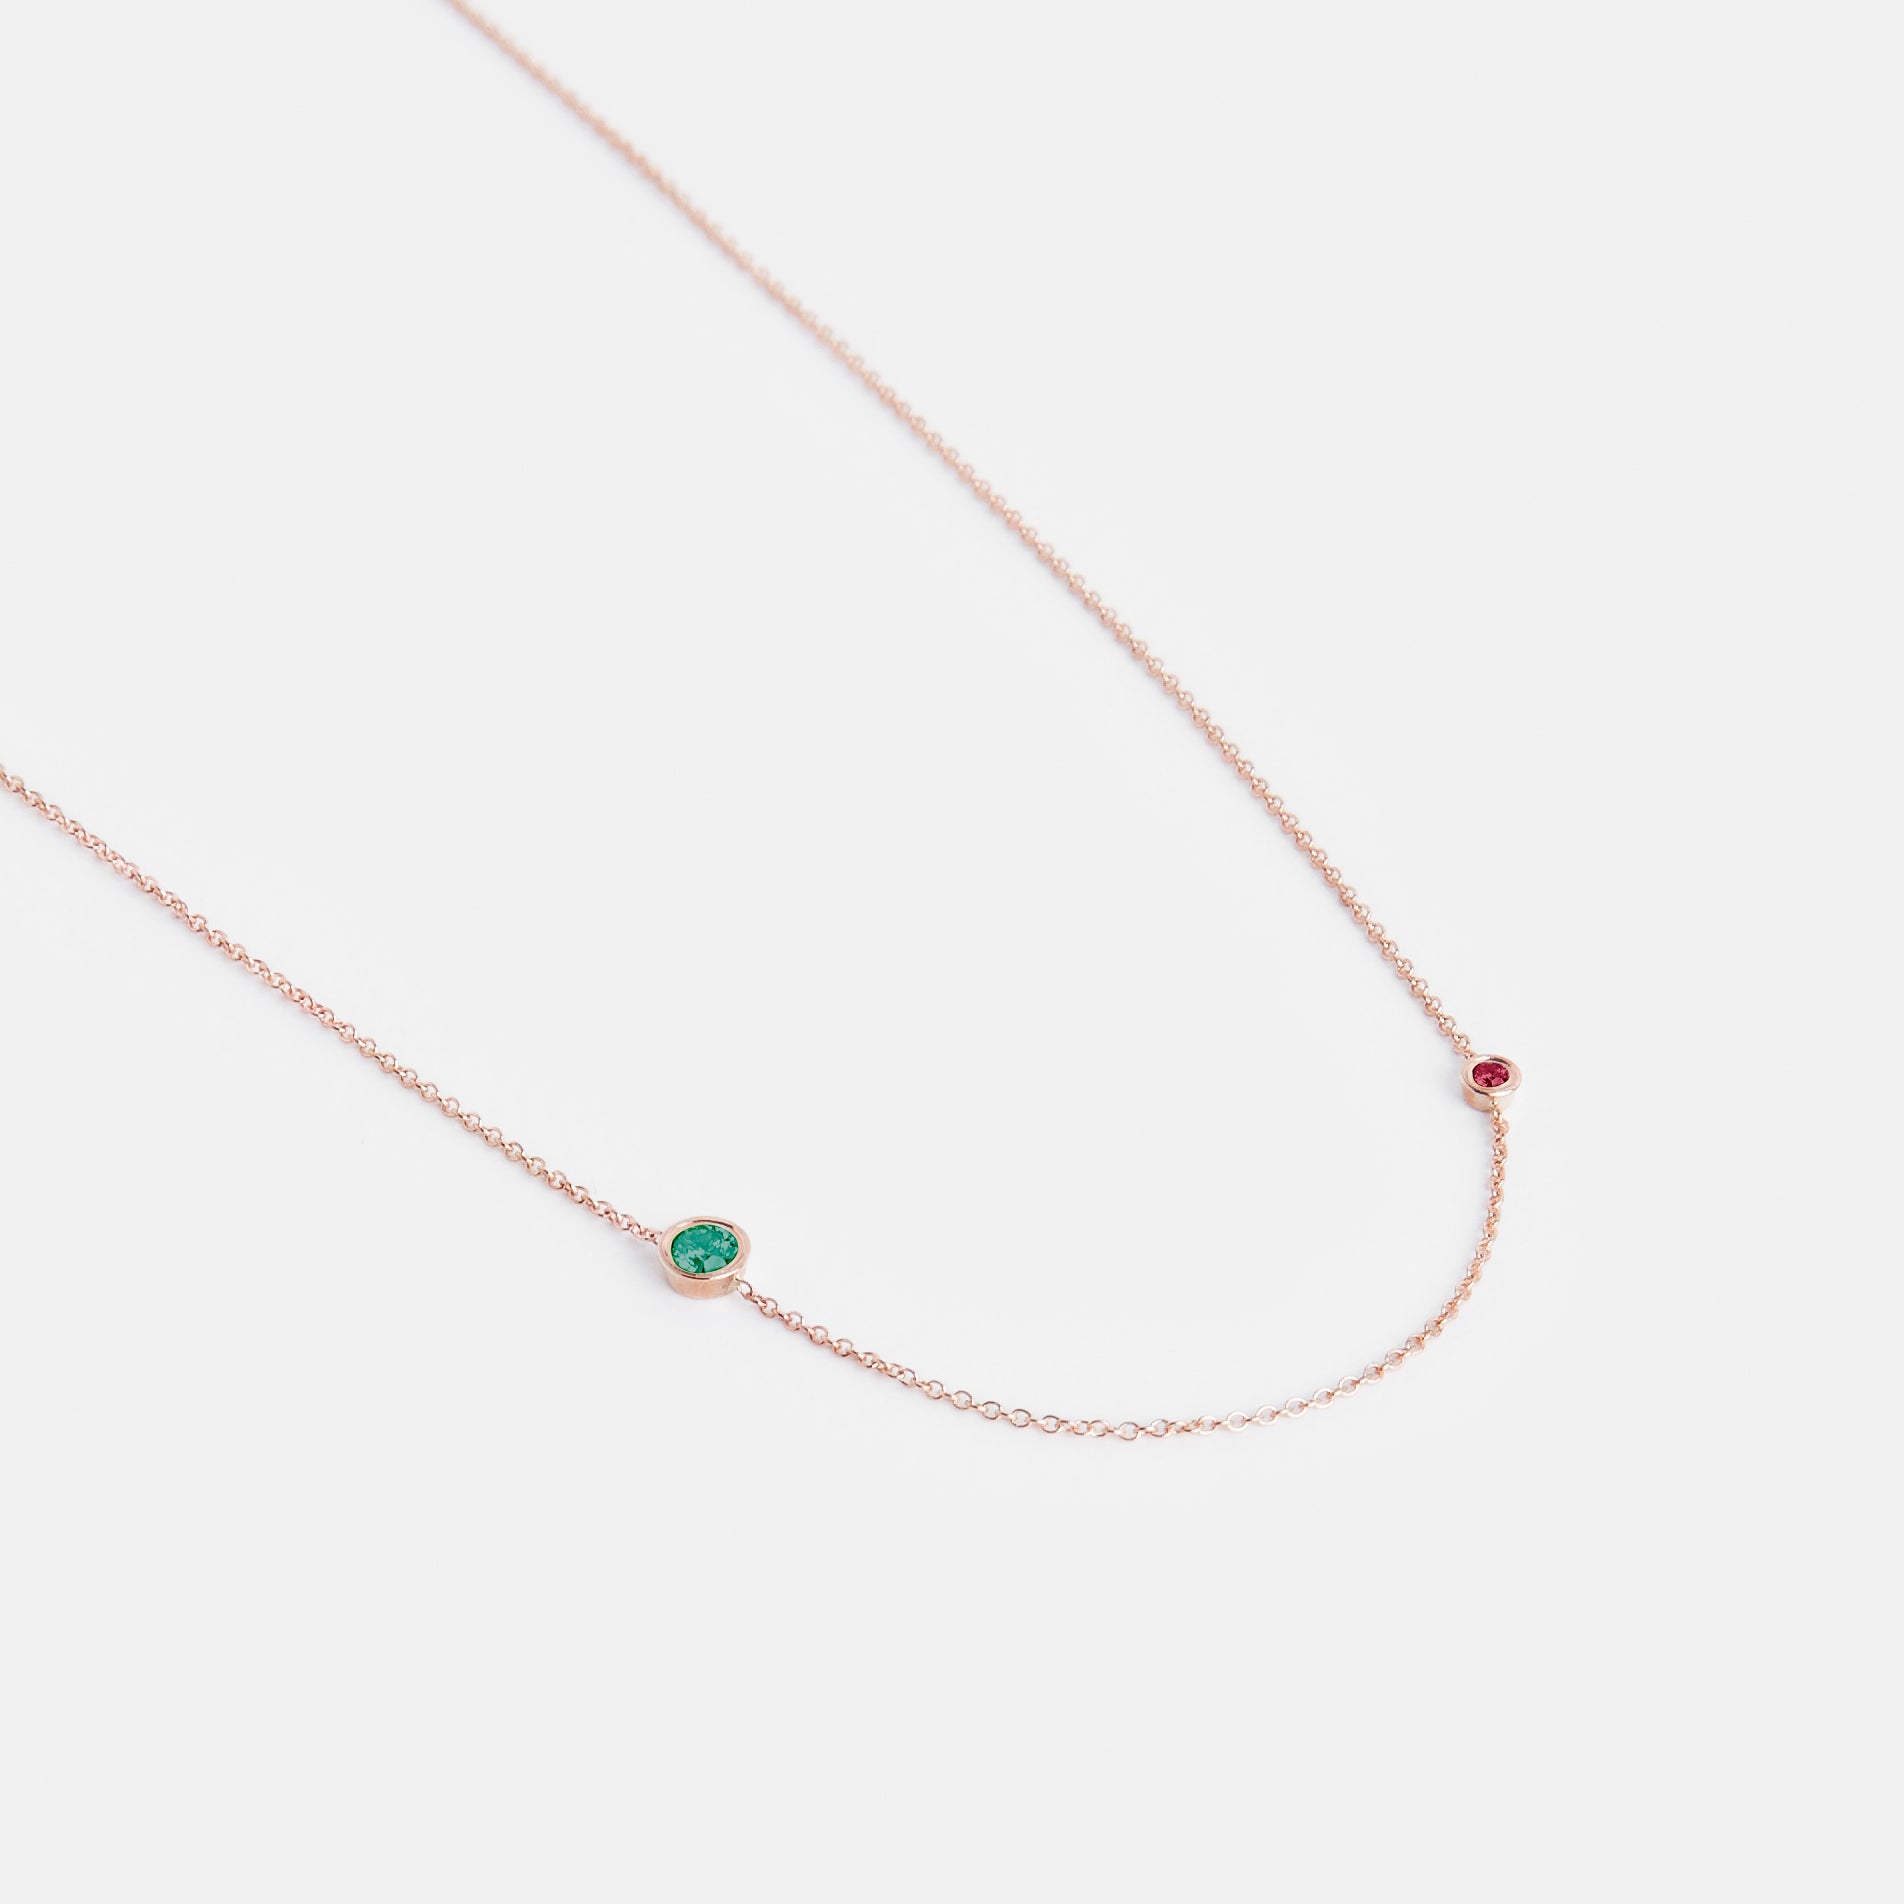 Iba Designer Necklace in 14k Rose Gold set with Emerald and Ruby By SHW Fine Jewelry NYC